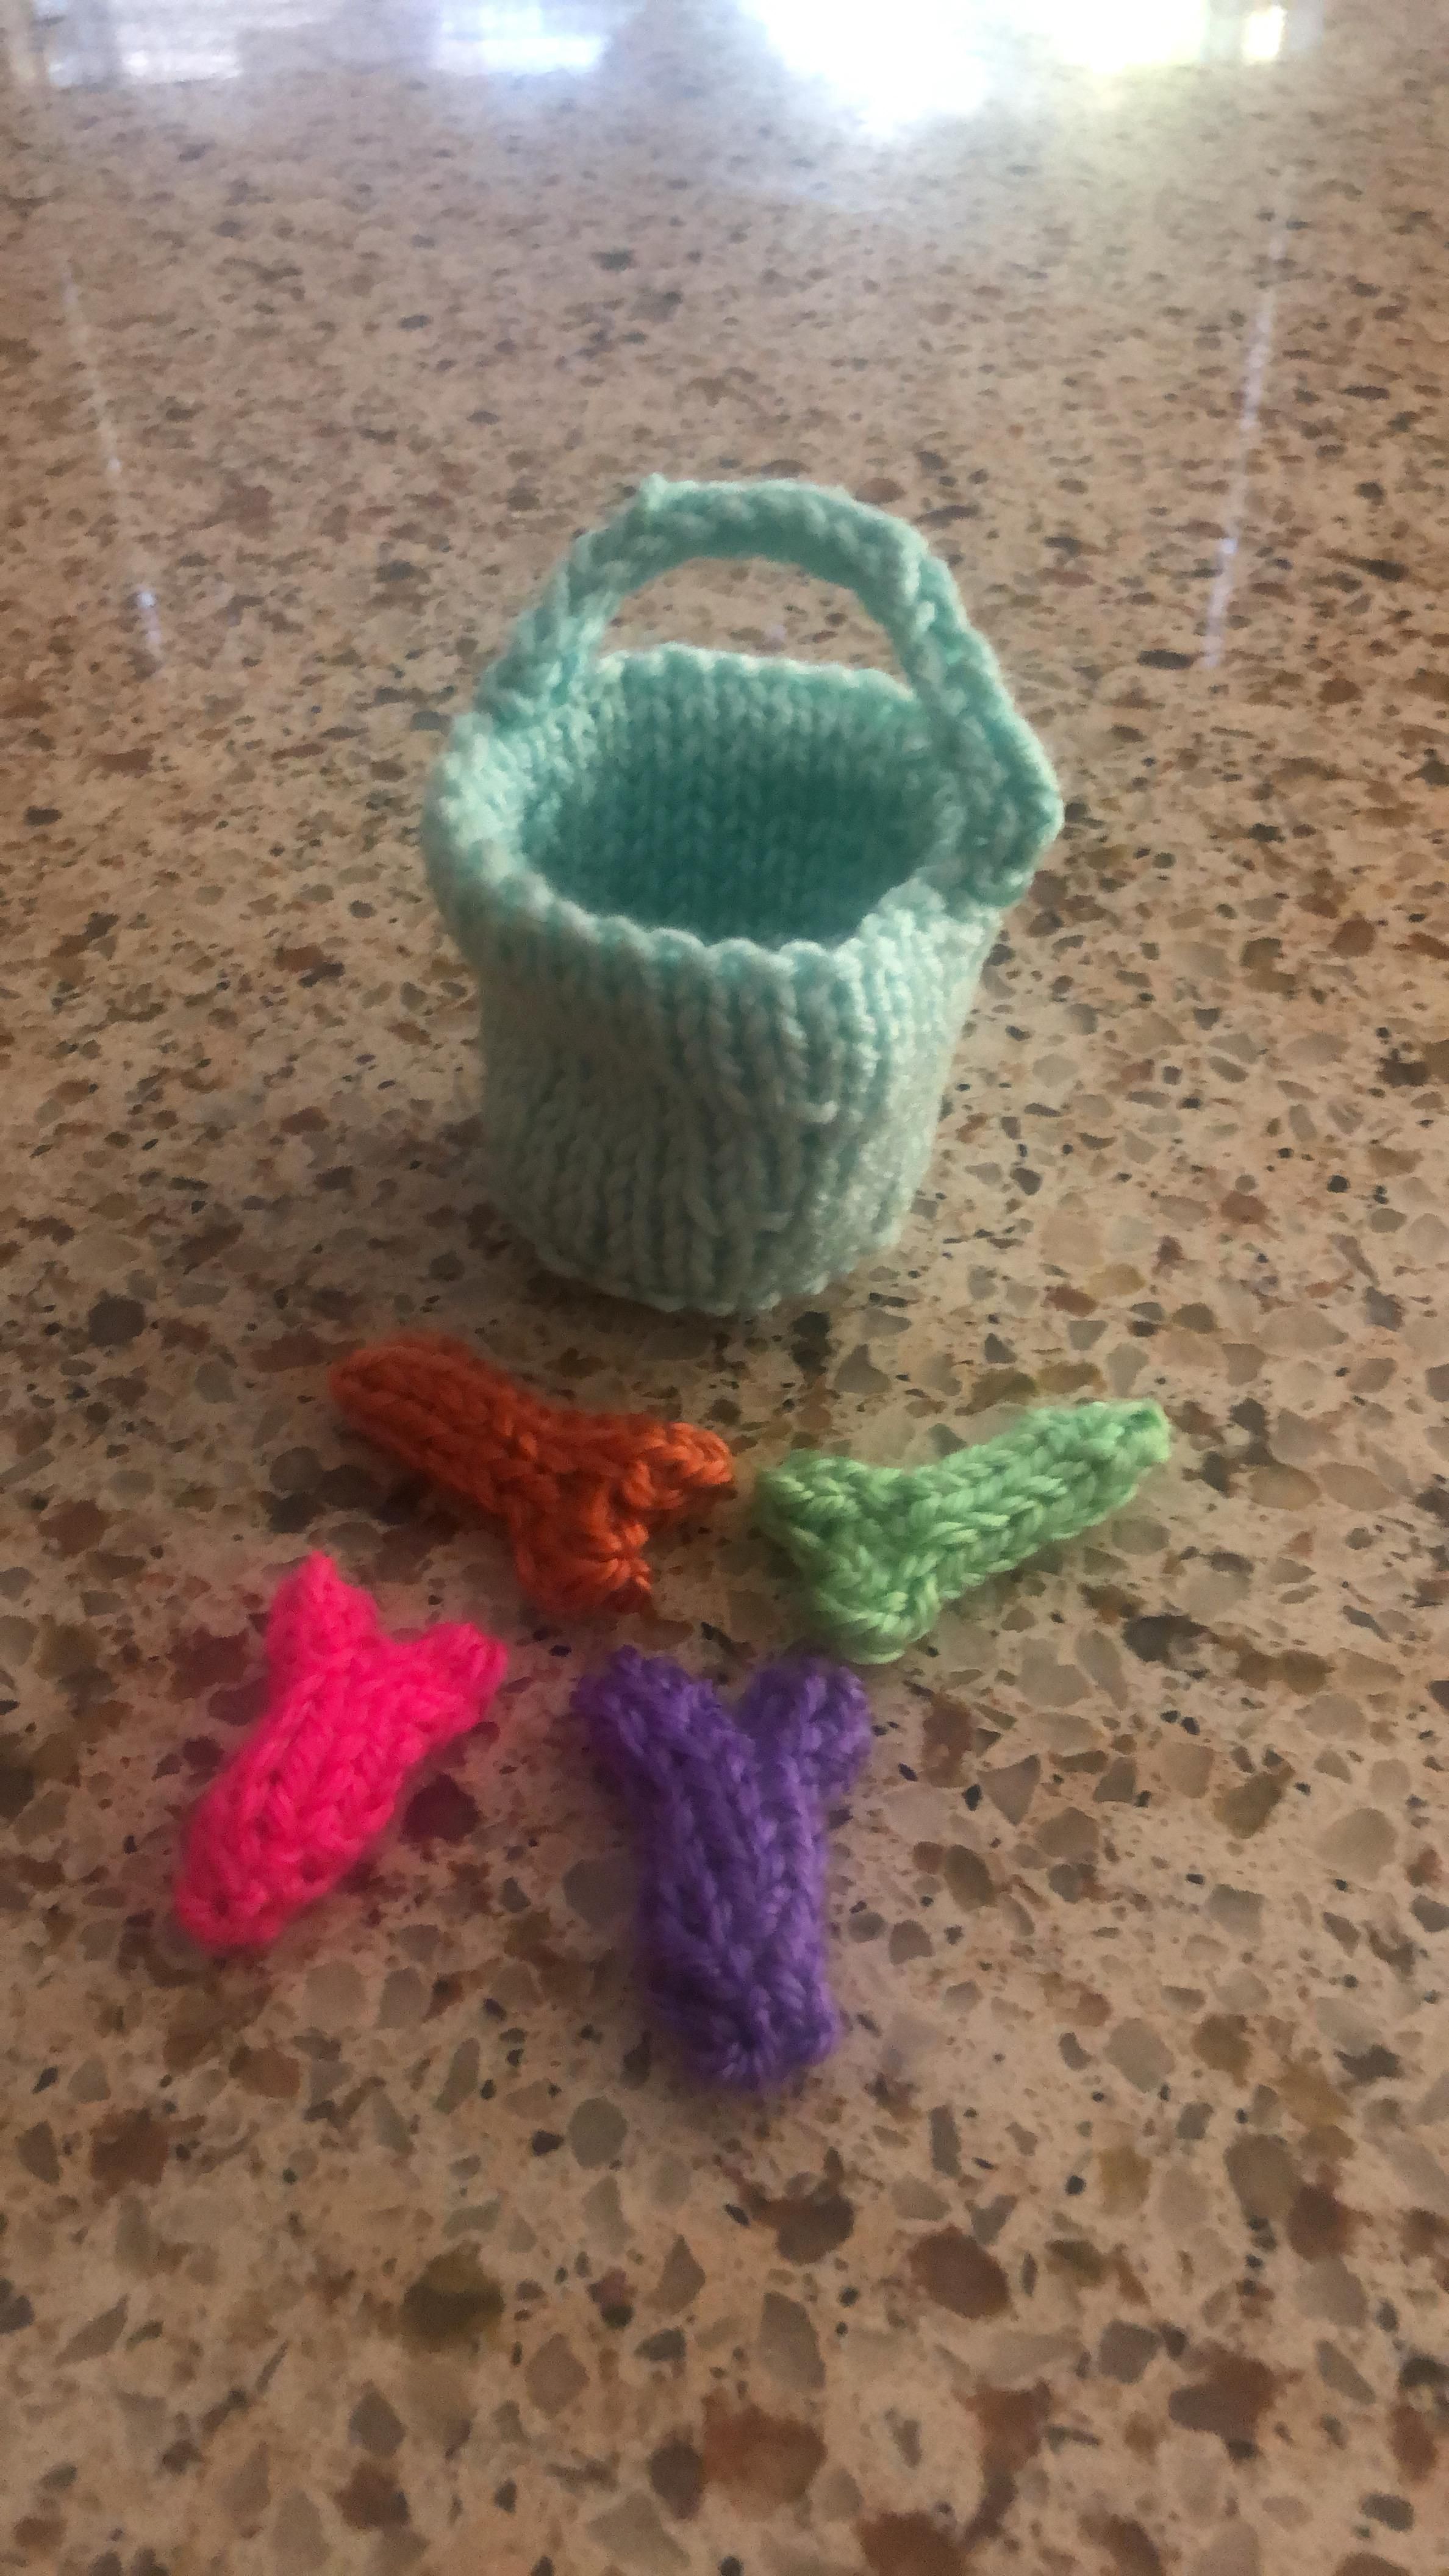 To cheer me up during stay-at-home my friend knitted me this little bucket of dicks.